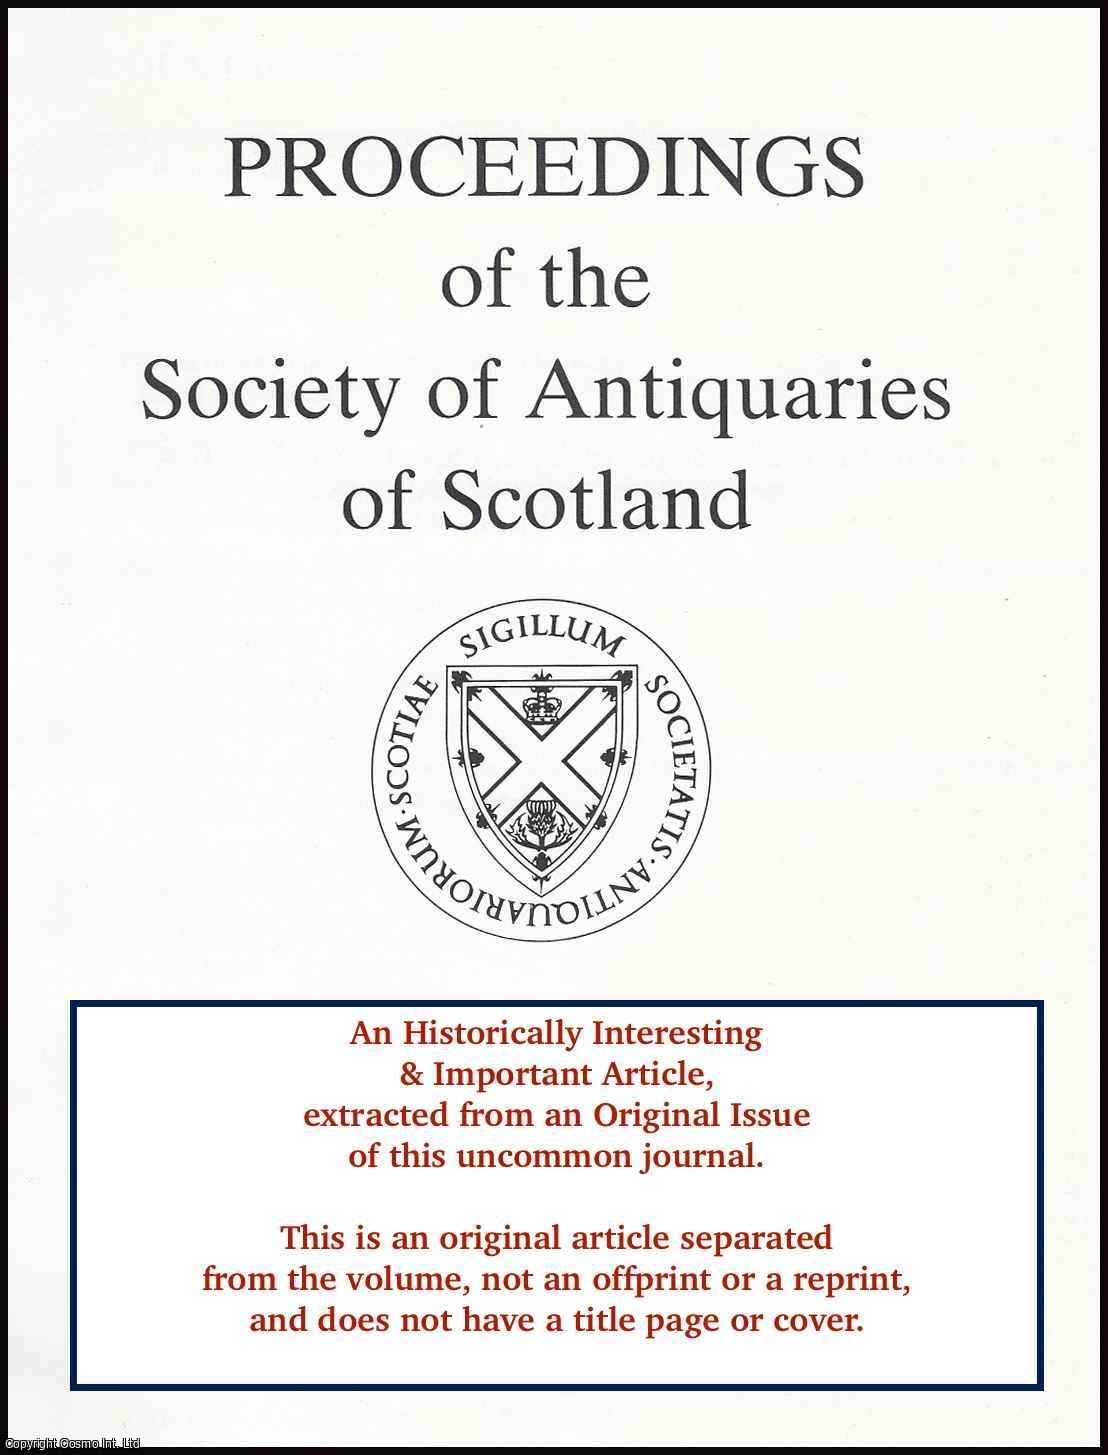 David H. Caldwell - Tantallon Castle, East Lothian: A Catalogue of The Finds. An original article from the Proceedings of the Society of Antiquaries of Scotland, 1991.